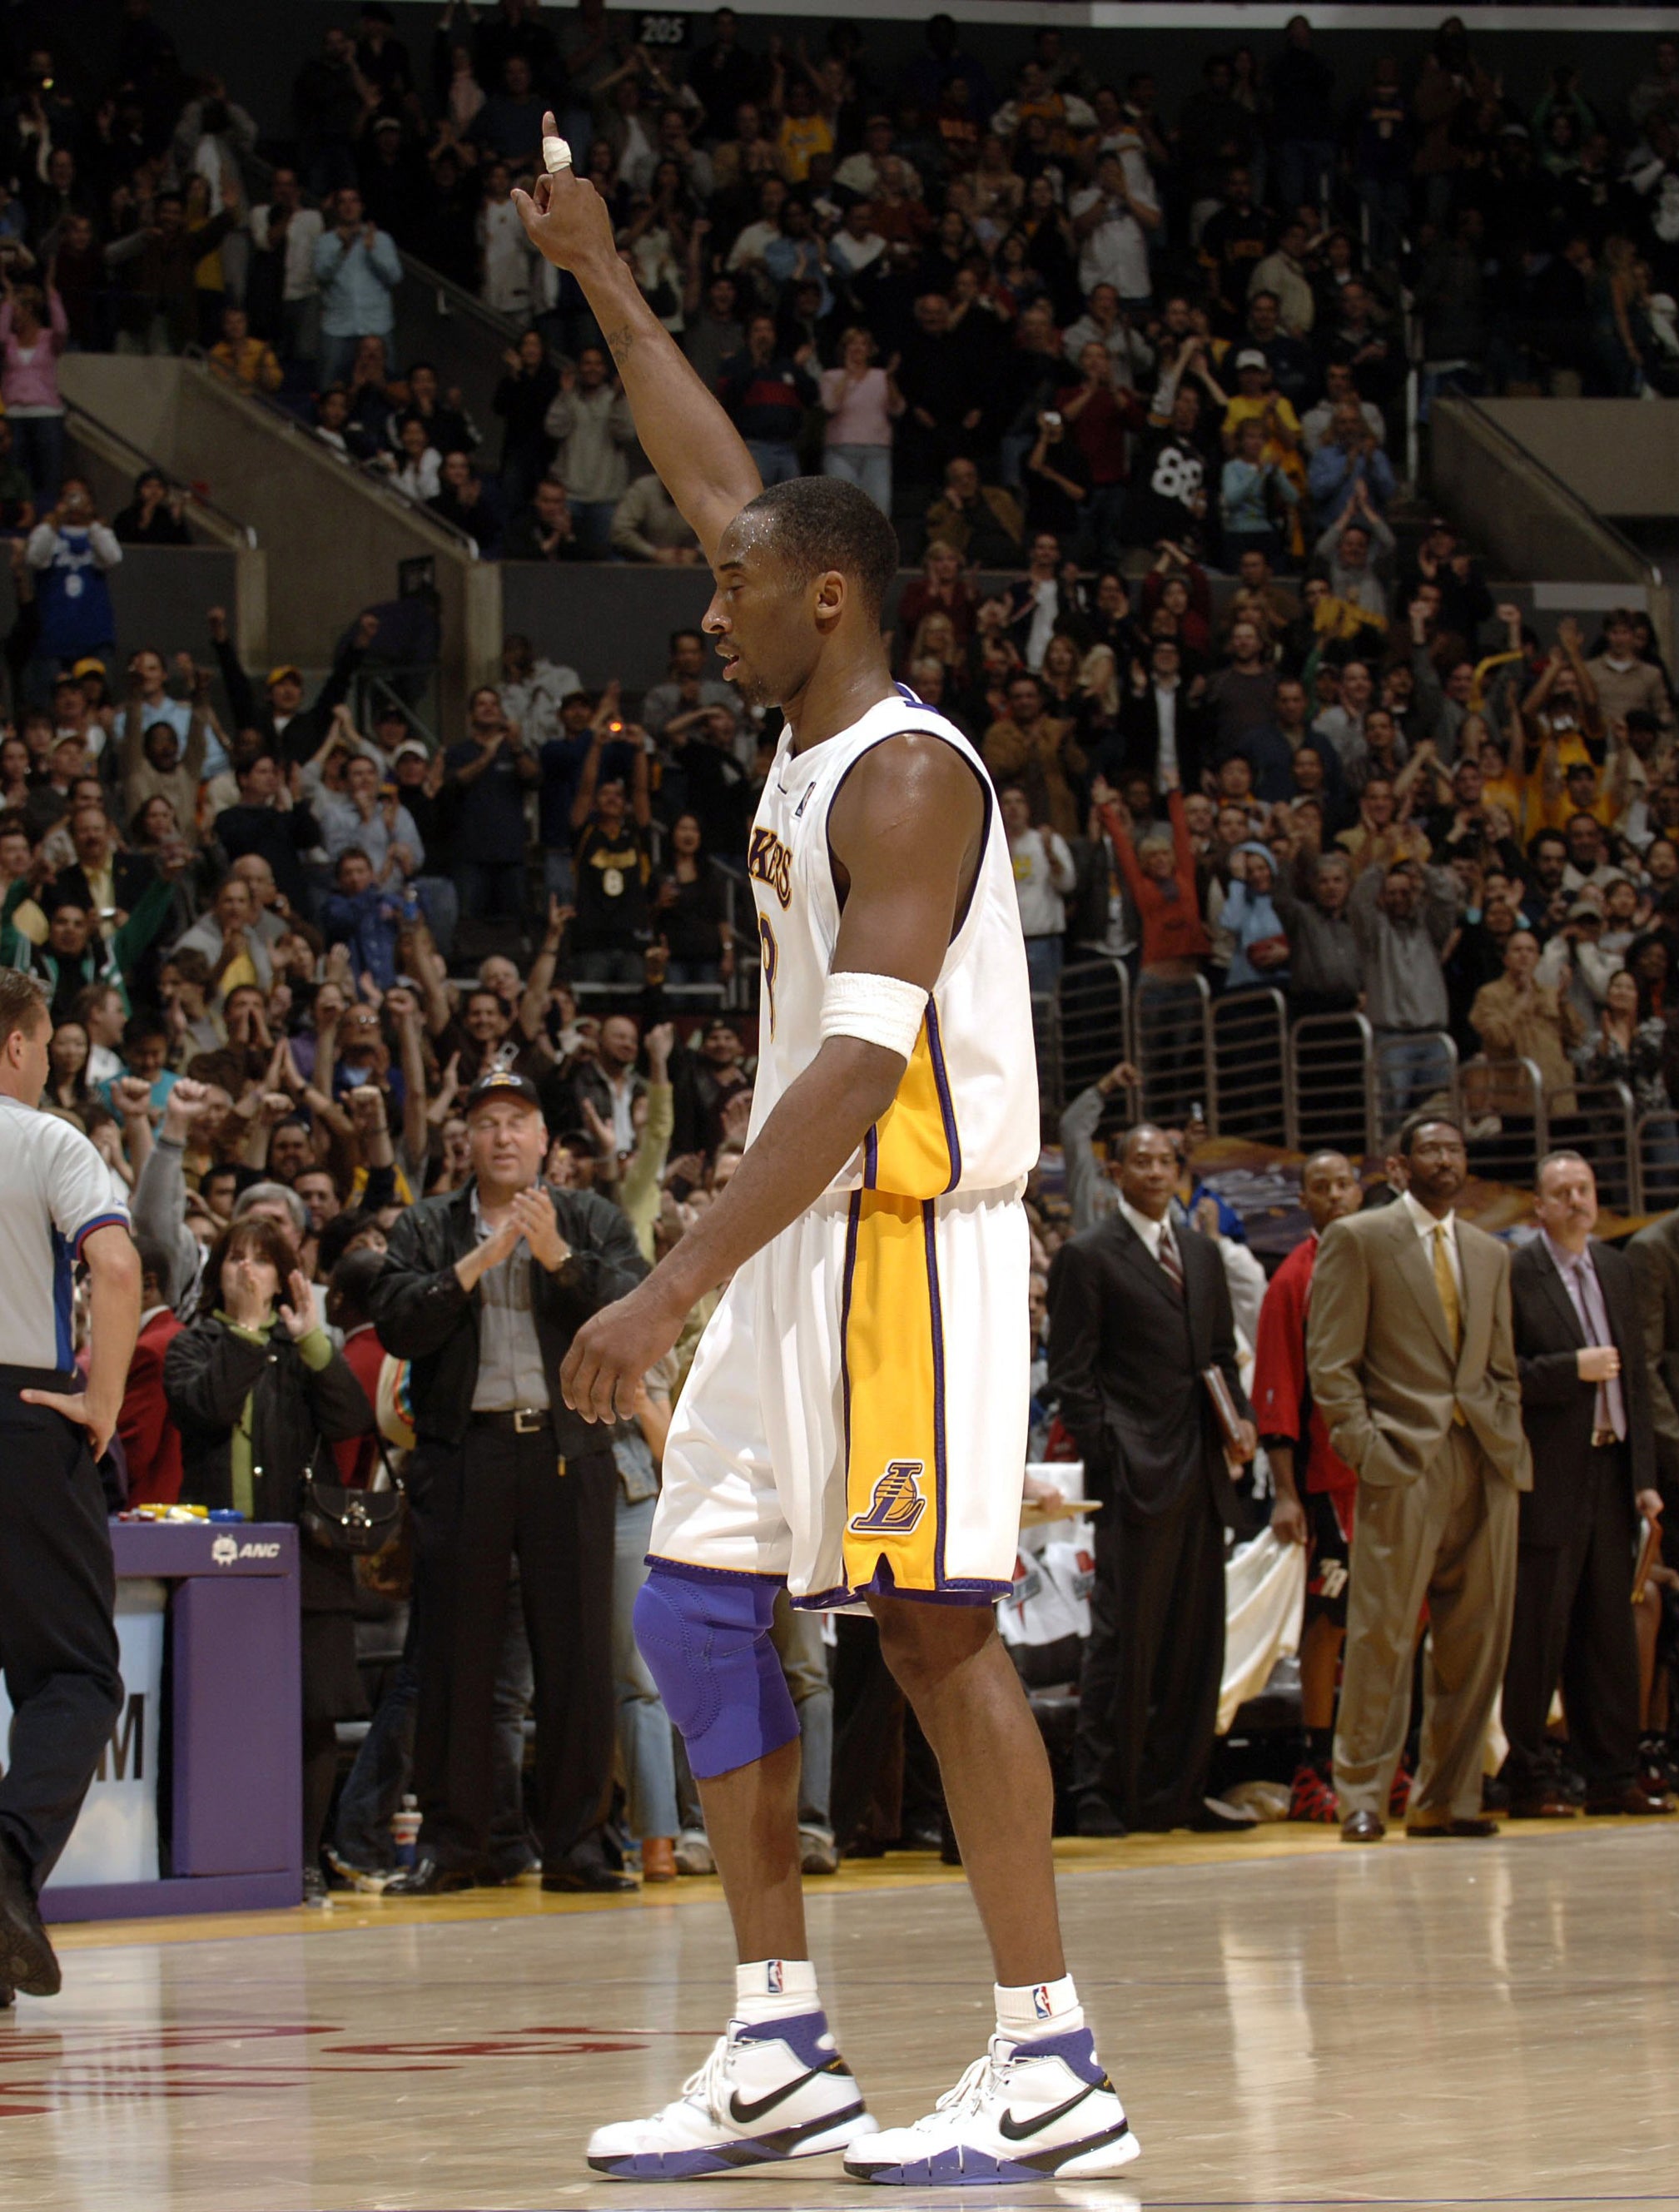 Kobe Bryant #8 of the Los Angeles Lakers points in the air in a game he scored 81 points in against the Toronto Raptors on January 22, 2006 at Staples Center in Los Angeles, California.